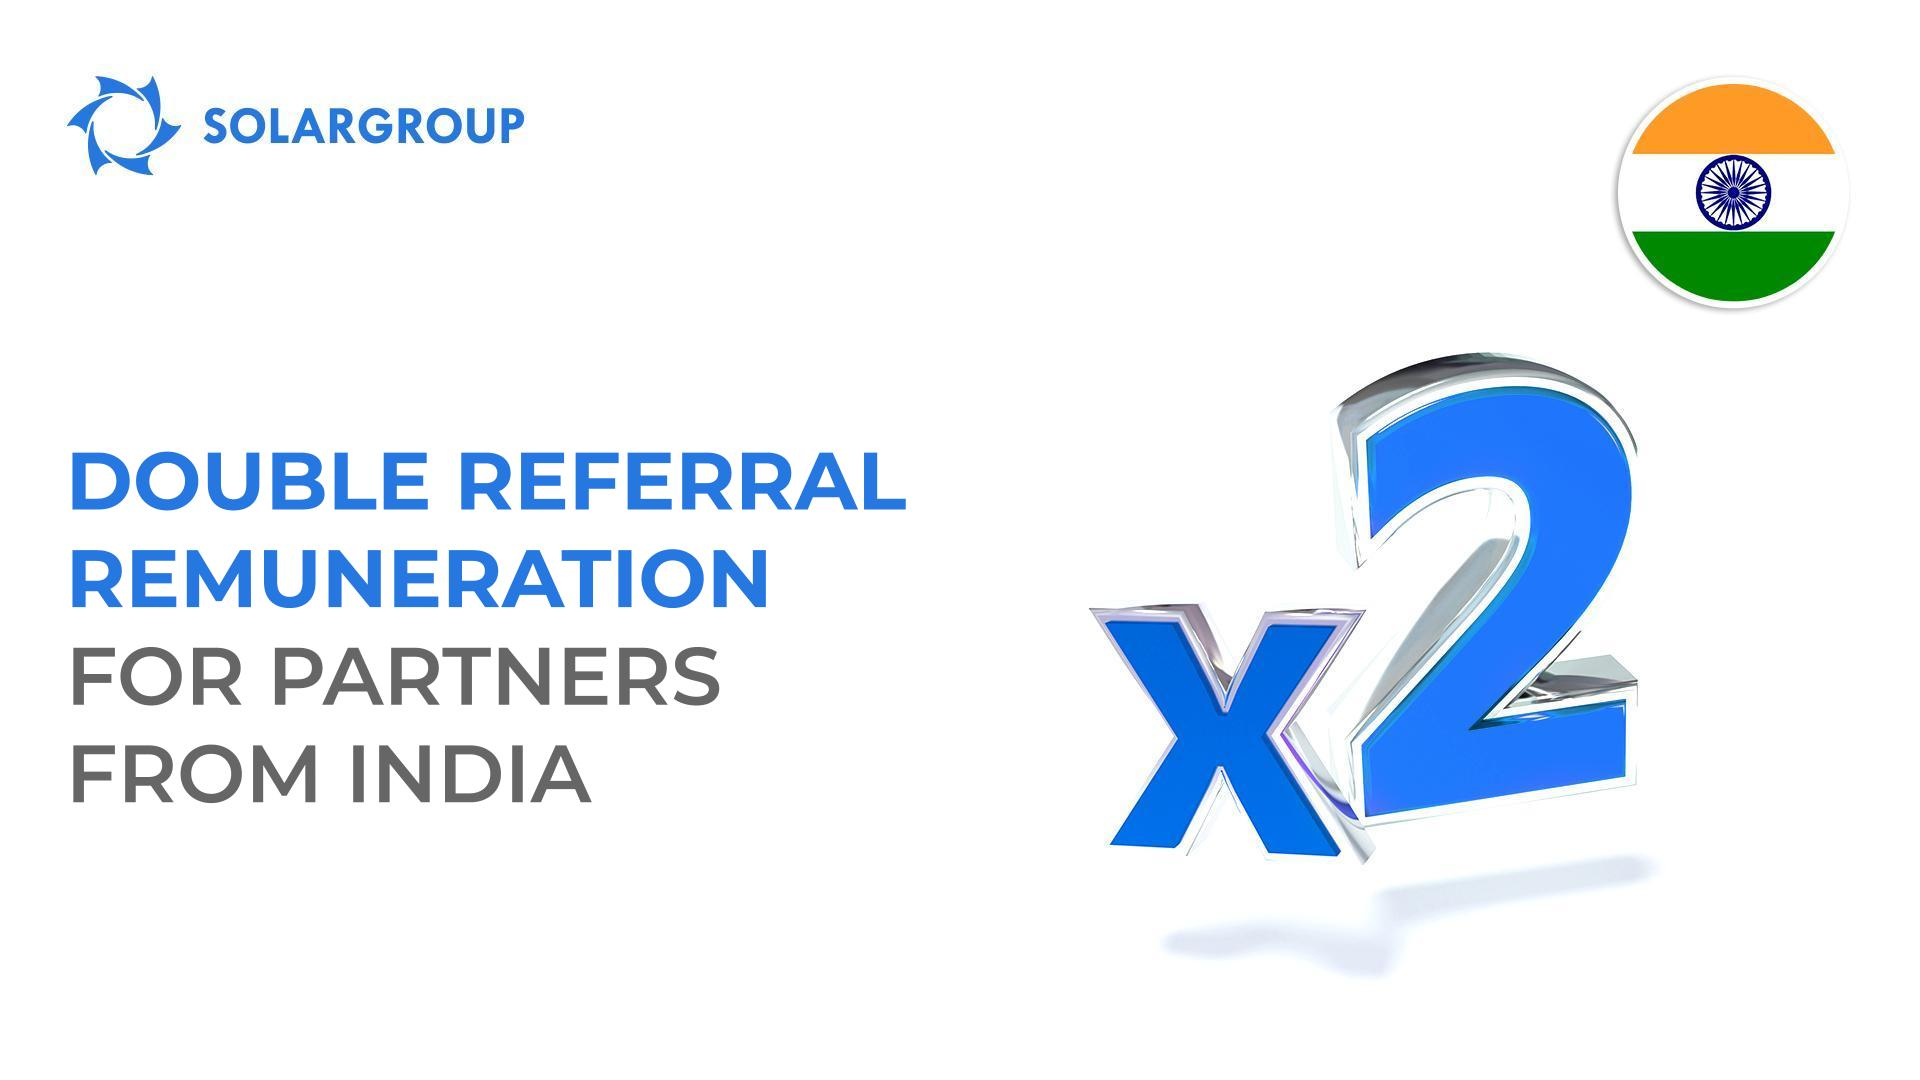 Double referral remuneration for partners from India